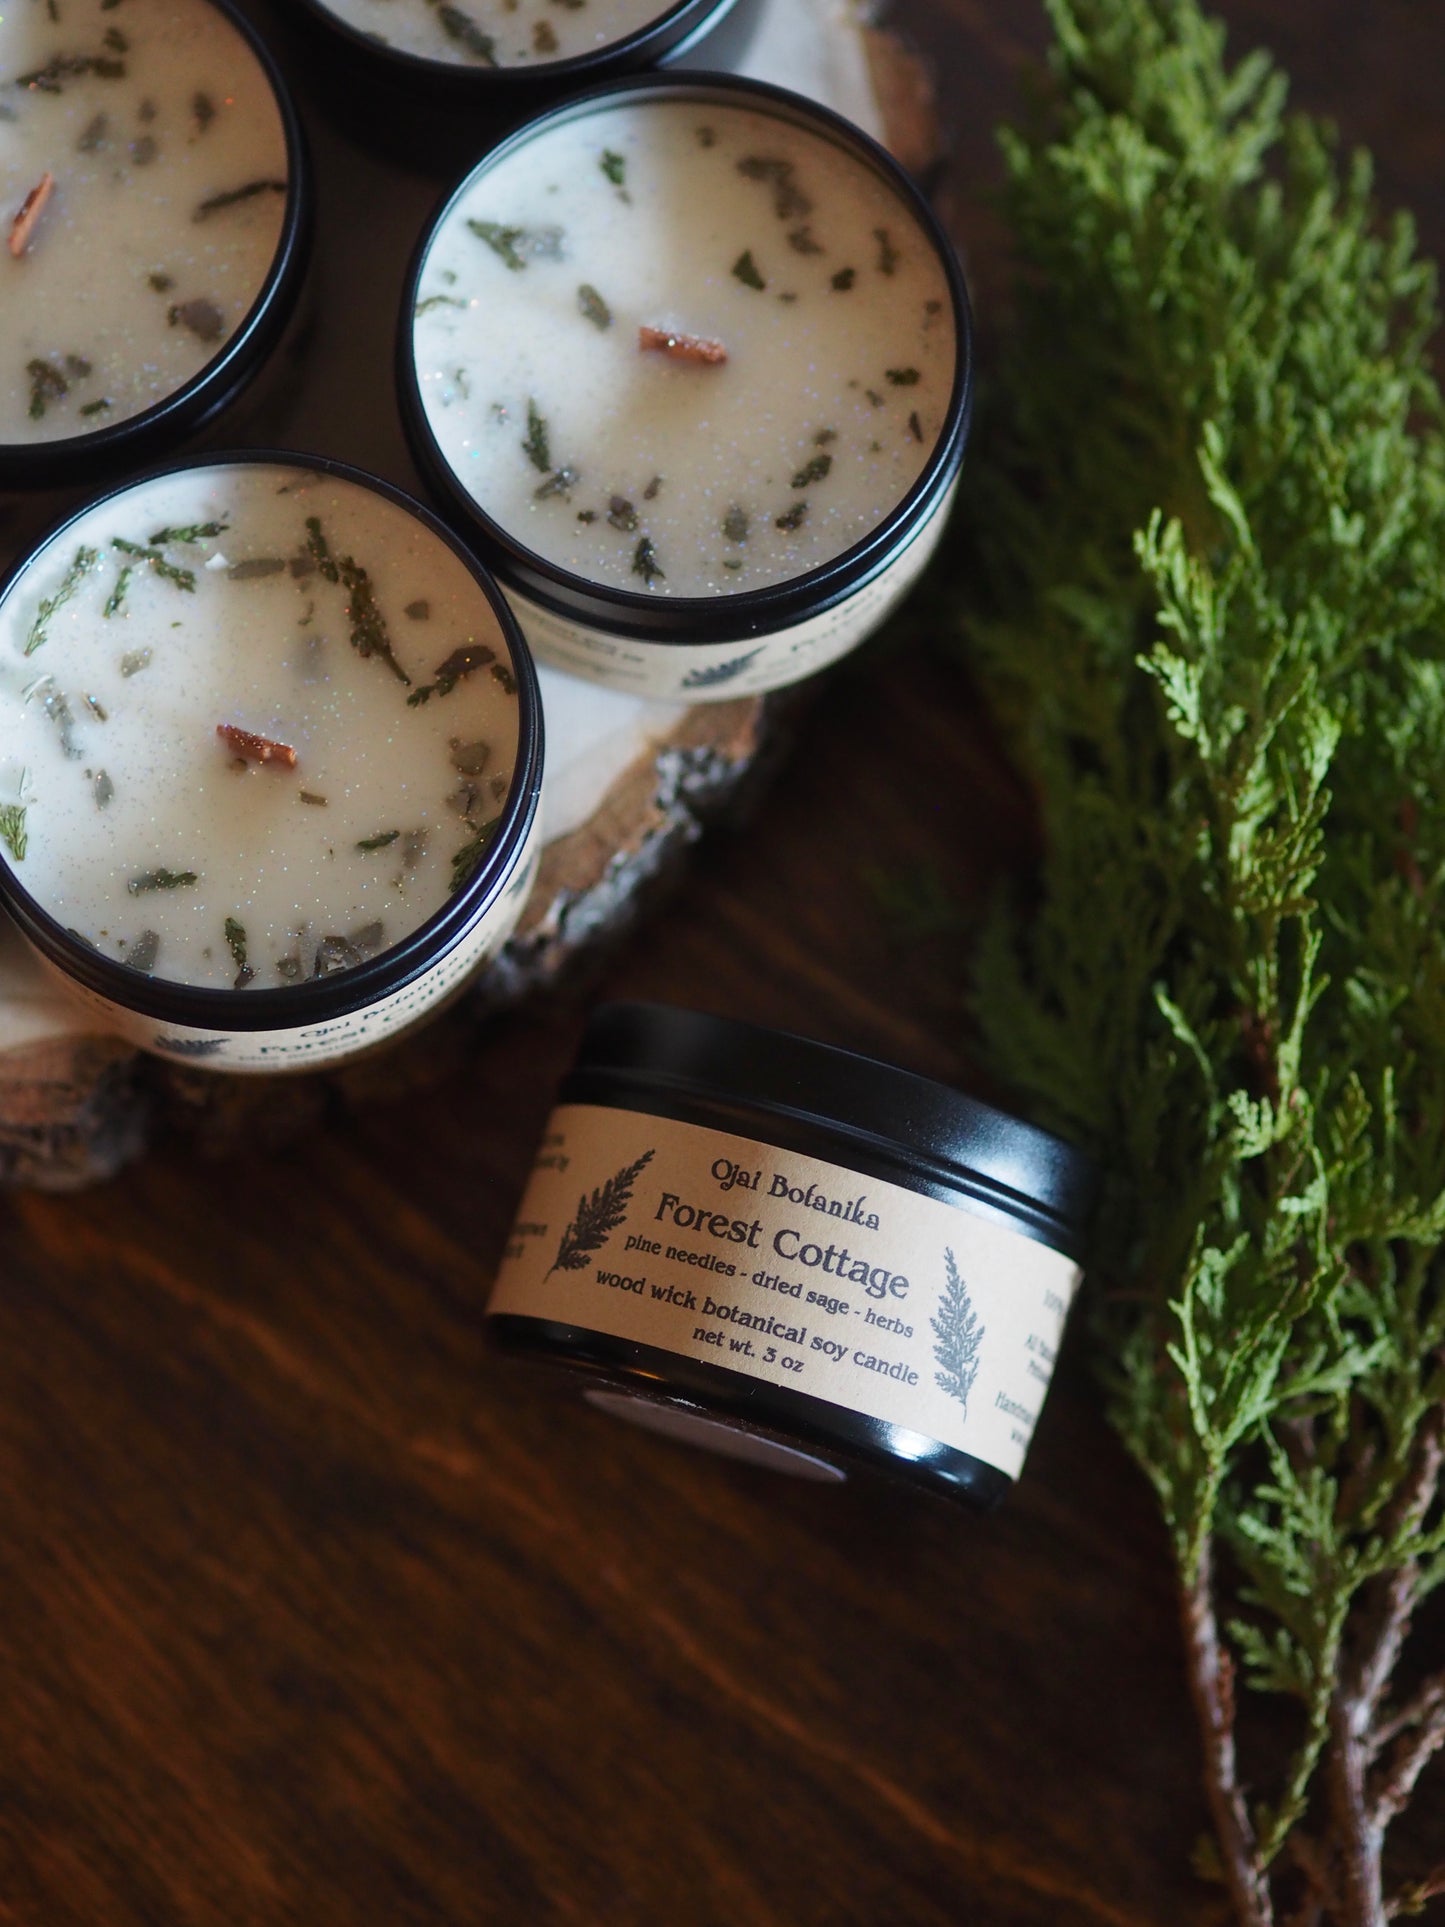 Forest Cottage - Pine Needle & Sage - Wood Wick Soy Candle - Limited Edition